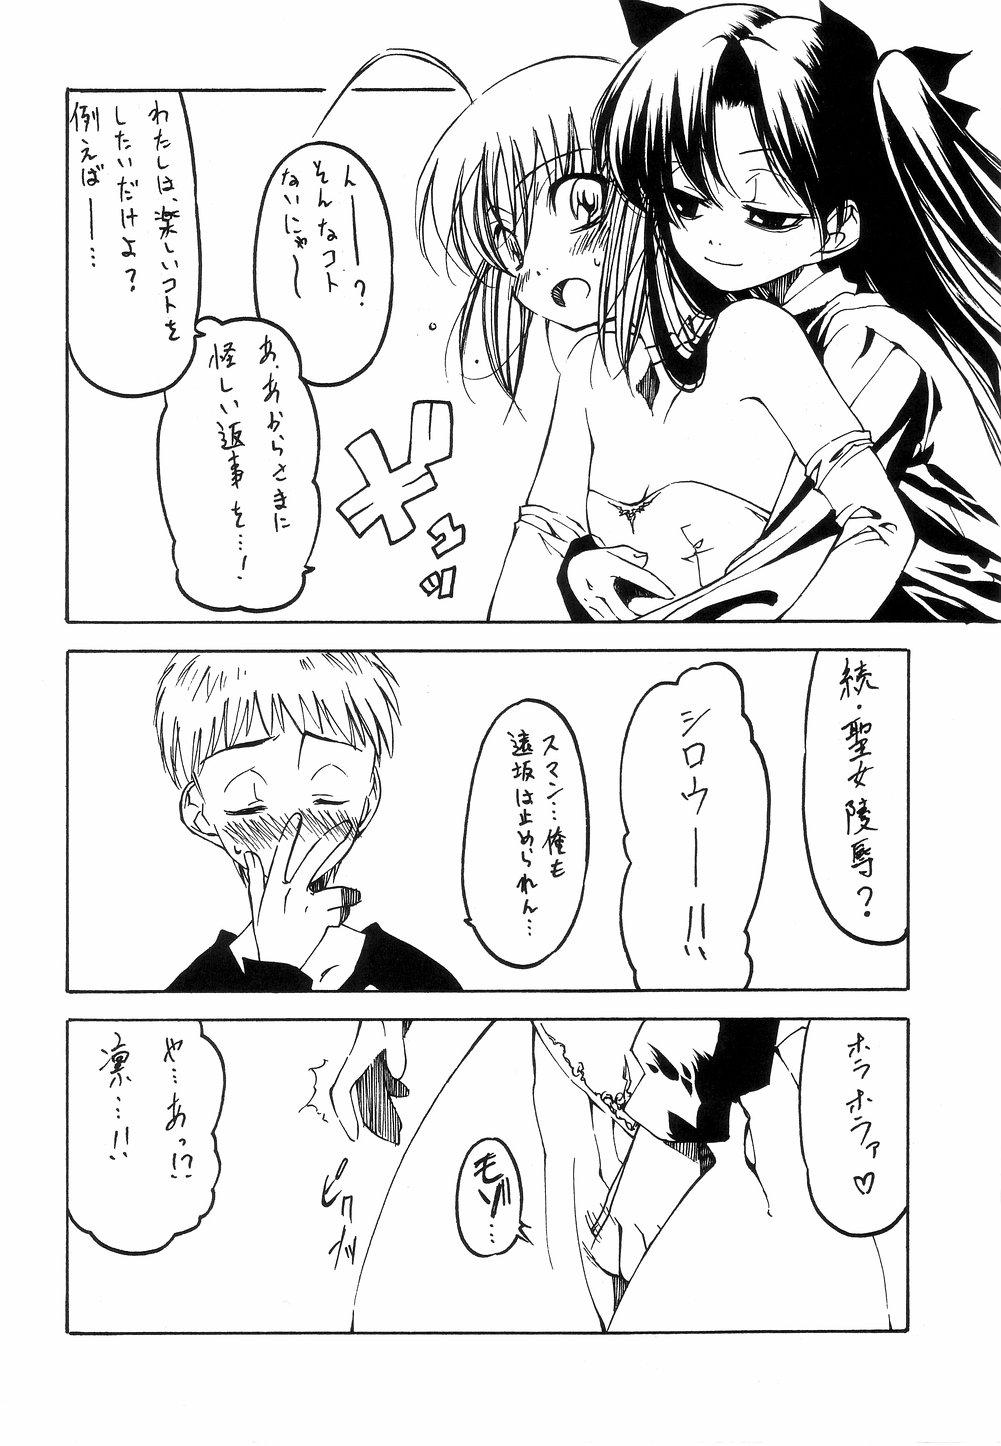 Tiny Titties Ou no Kigae - Fate stay night Work - Page 5